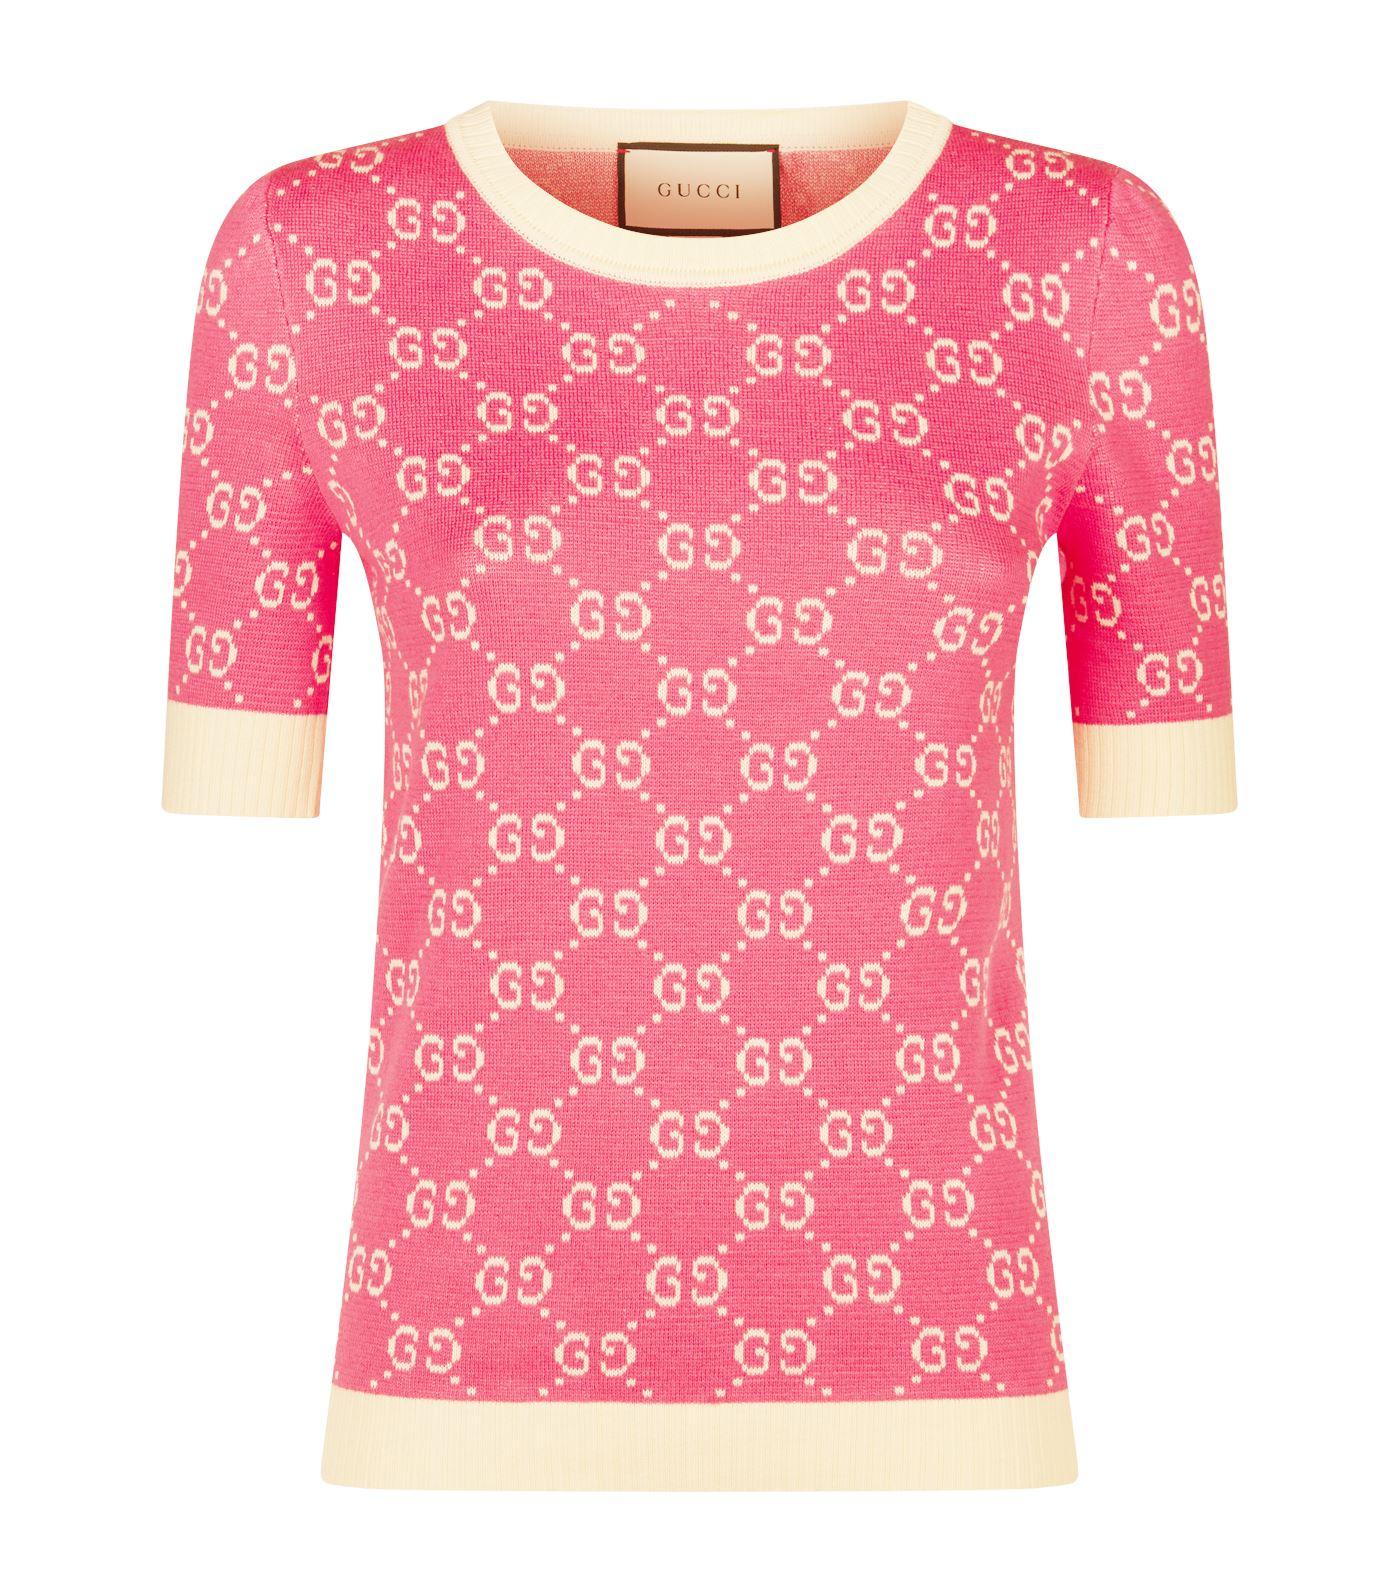 Gucci Cotton GG Supreme Knit Top in Pink - Lyst